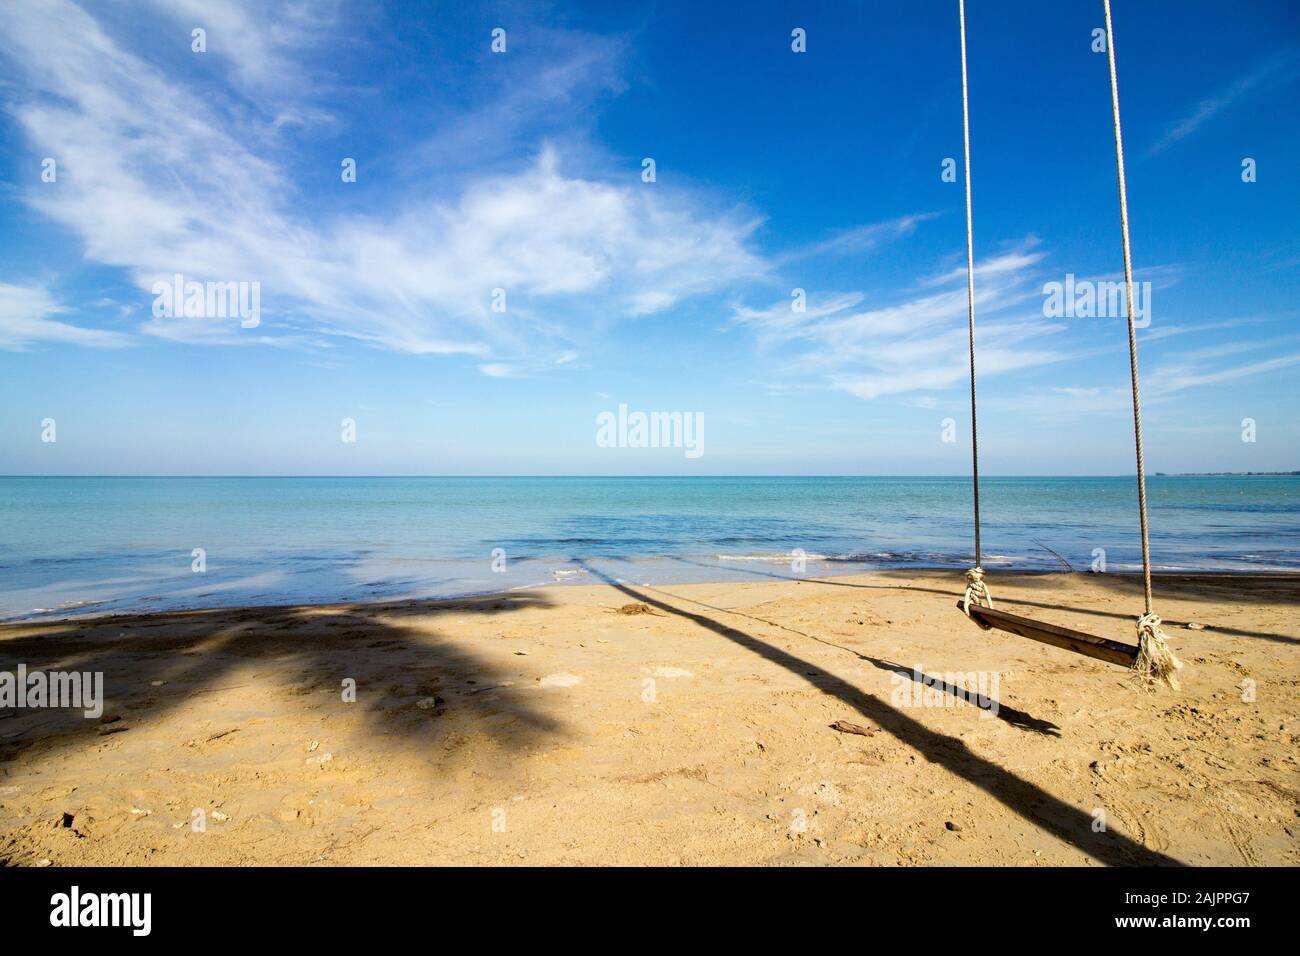 lonely swing on a dreamlike beach in front of a heavenly turquoise sea Stock Photo